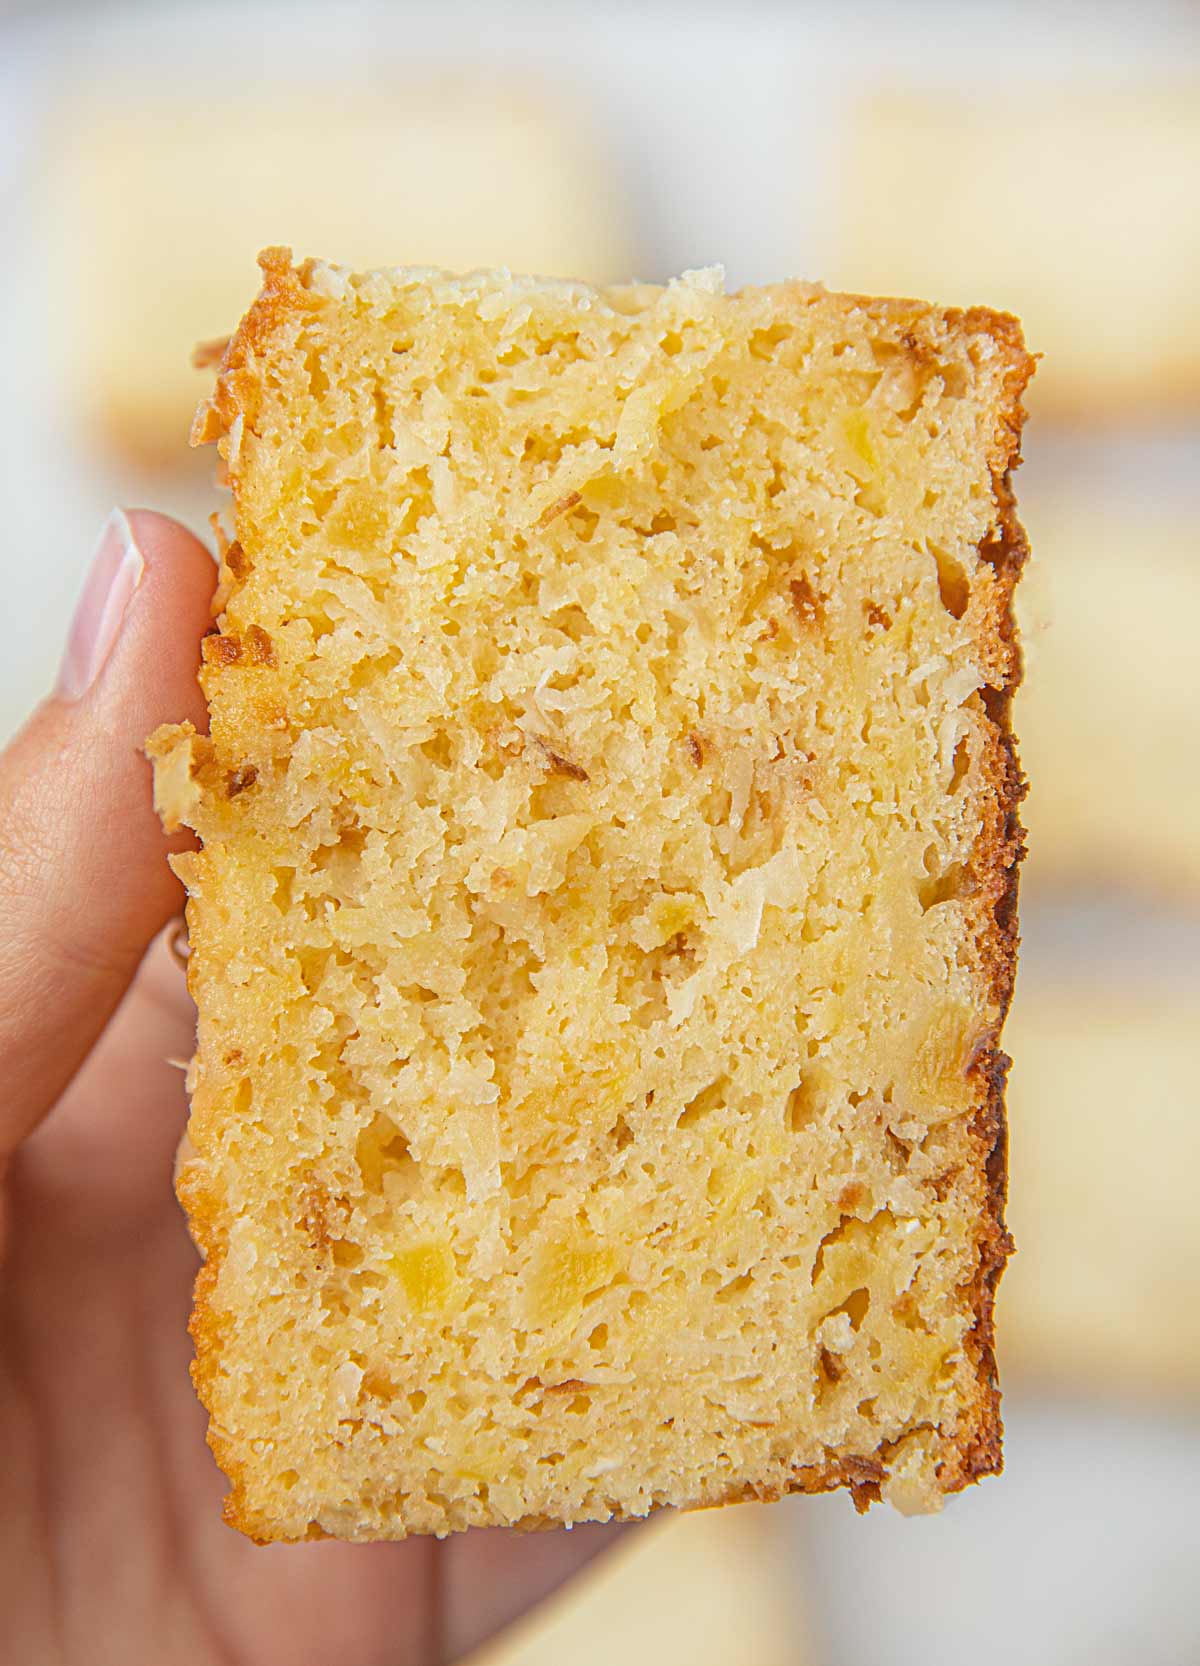 Hand holding slice of Pineapple Coconut Bread